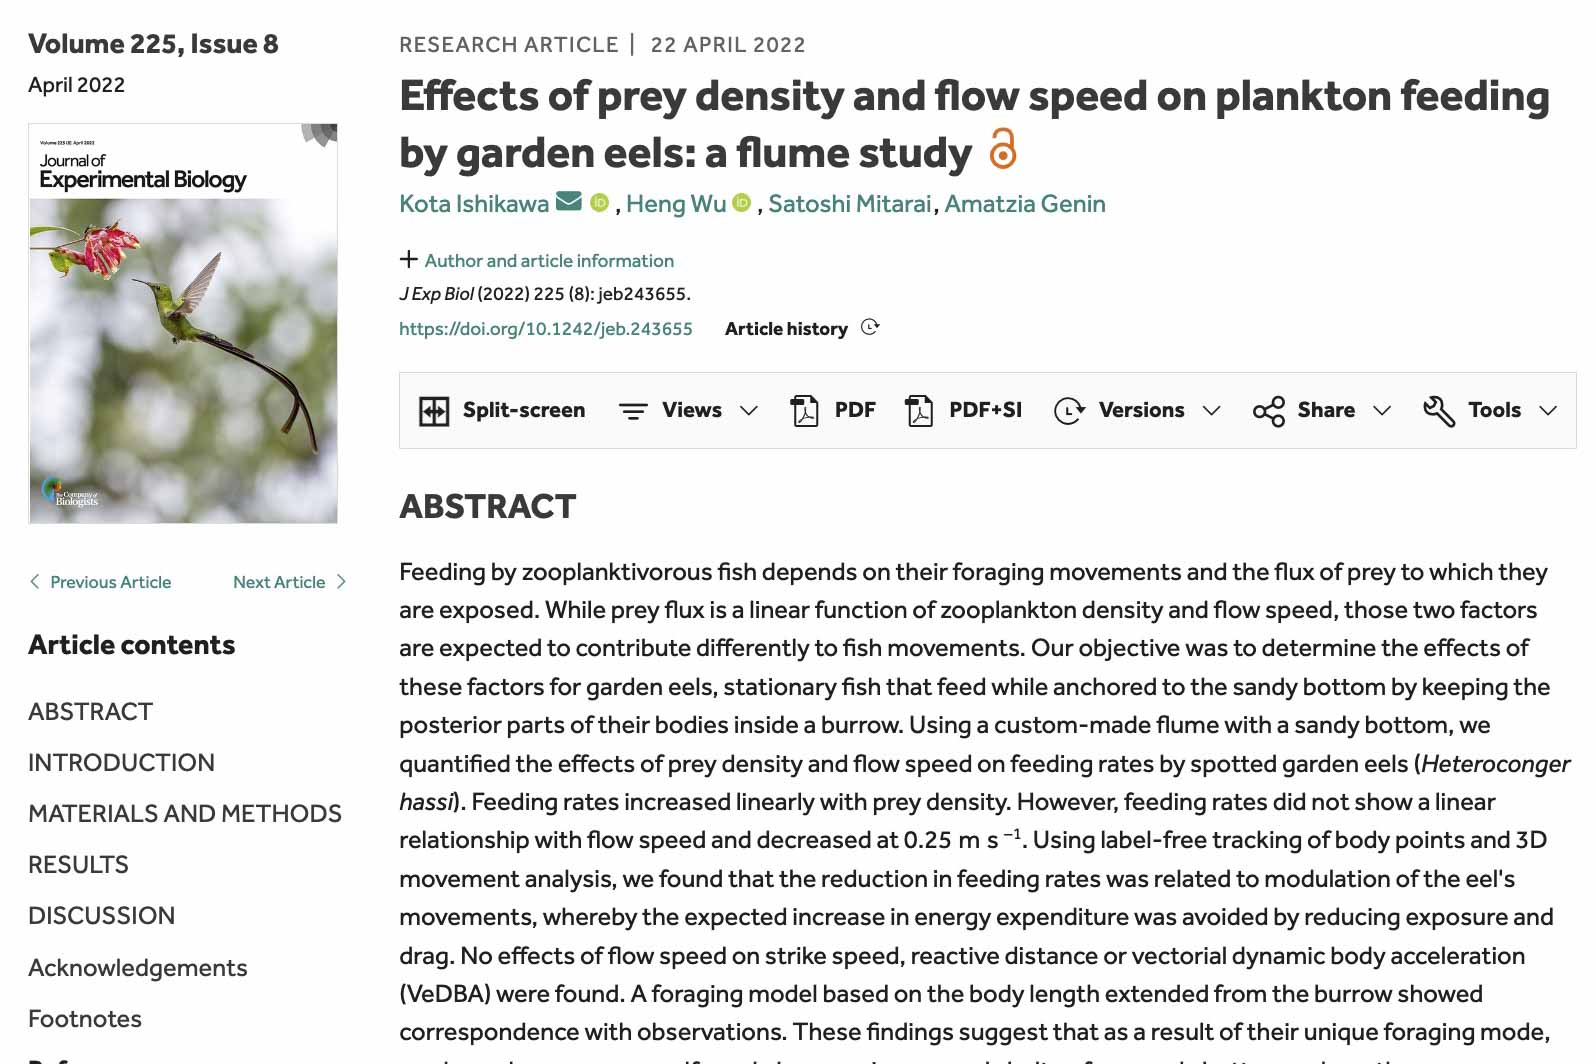 effects of prey density and flow speed on plankton feeding by garden eels: a flume study